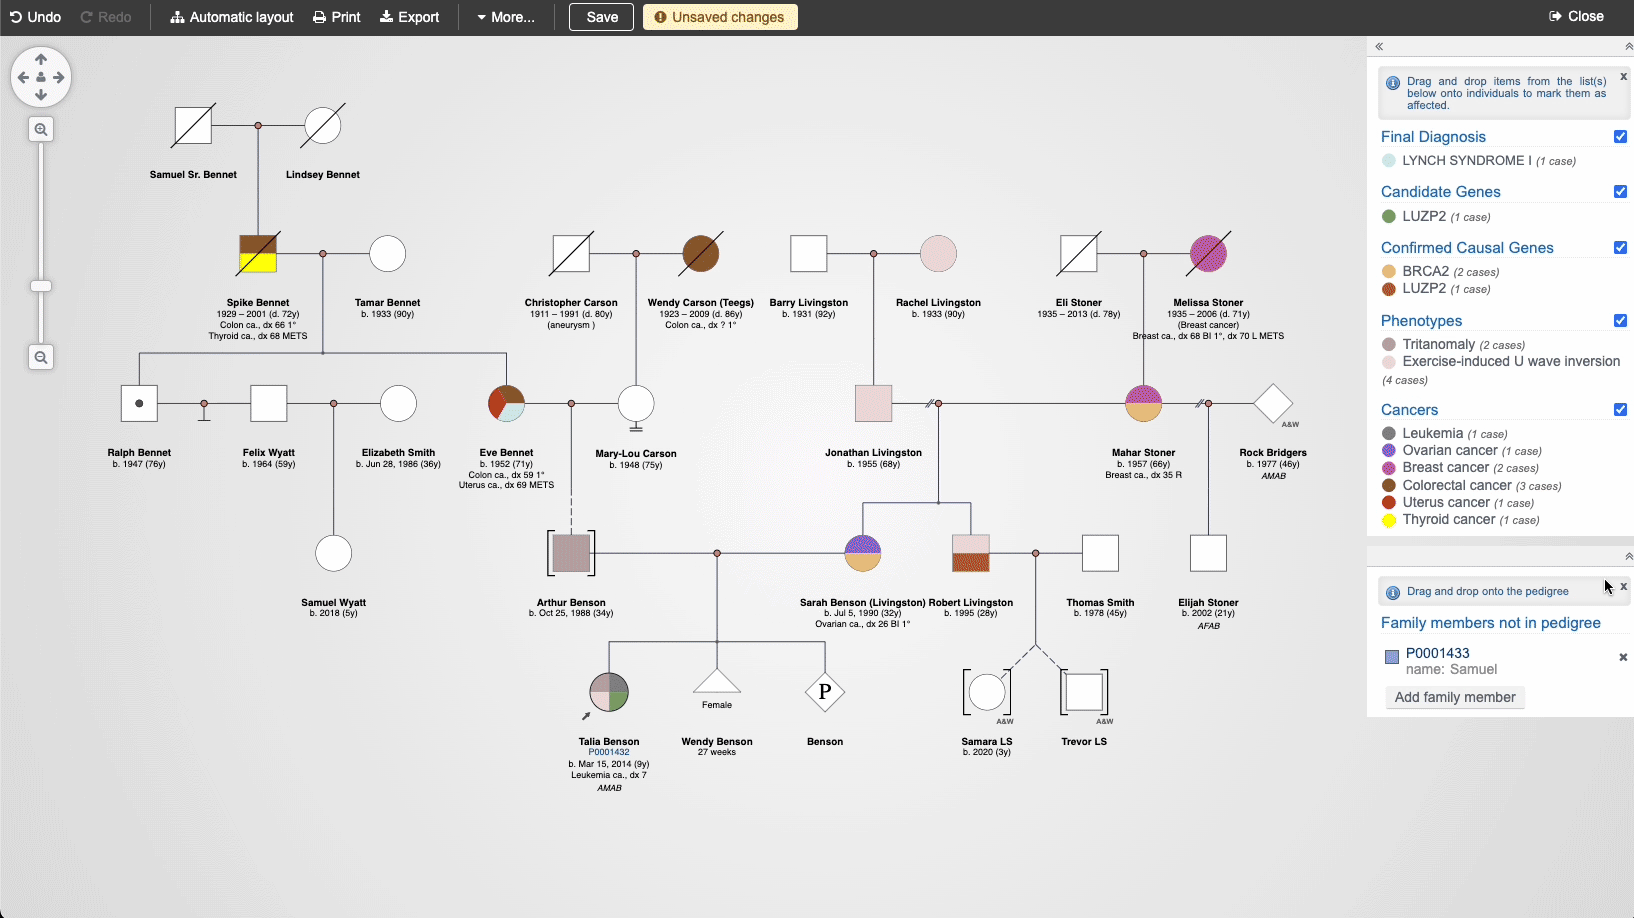 A GIF showing the PhenoTips pedigree tool in the process of drawing a pedigree chart for a patient